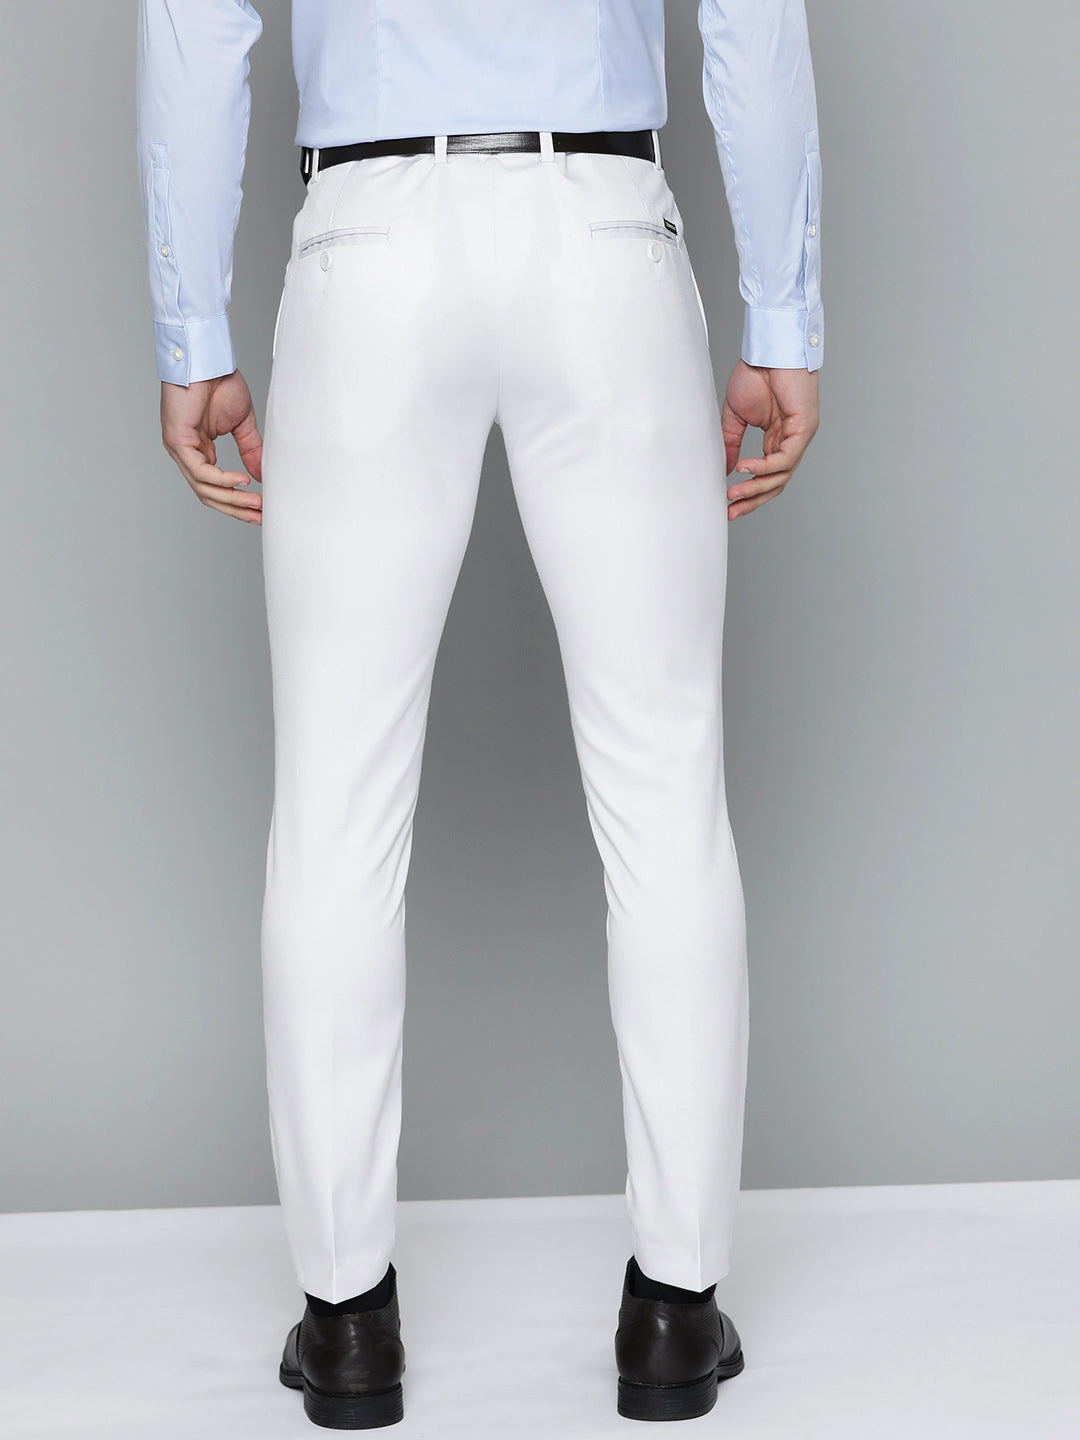 Kadls Cotton Mens White Formal Pant Pattern  Plain Waist Size  2840 at  Rs 325  Piece in Kanpur